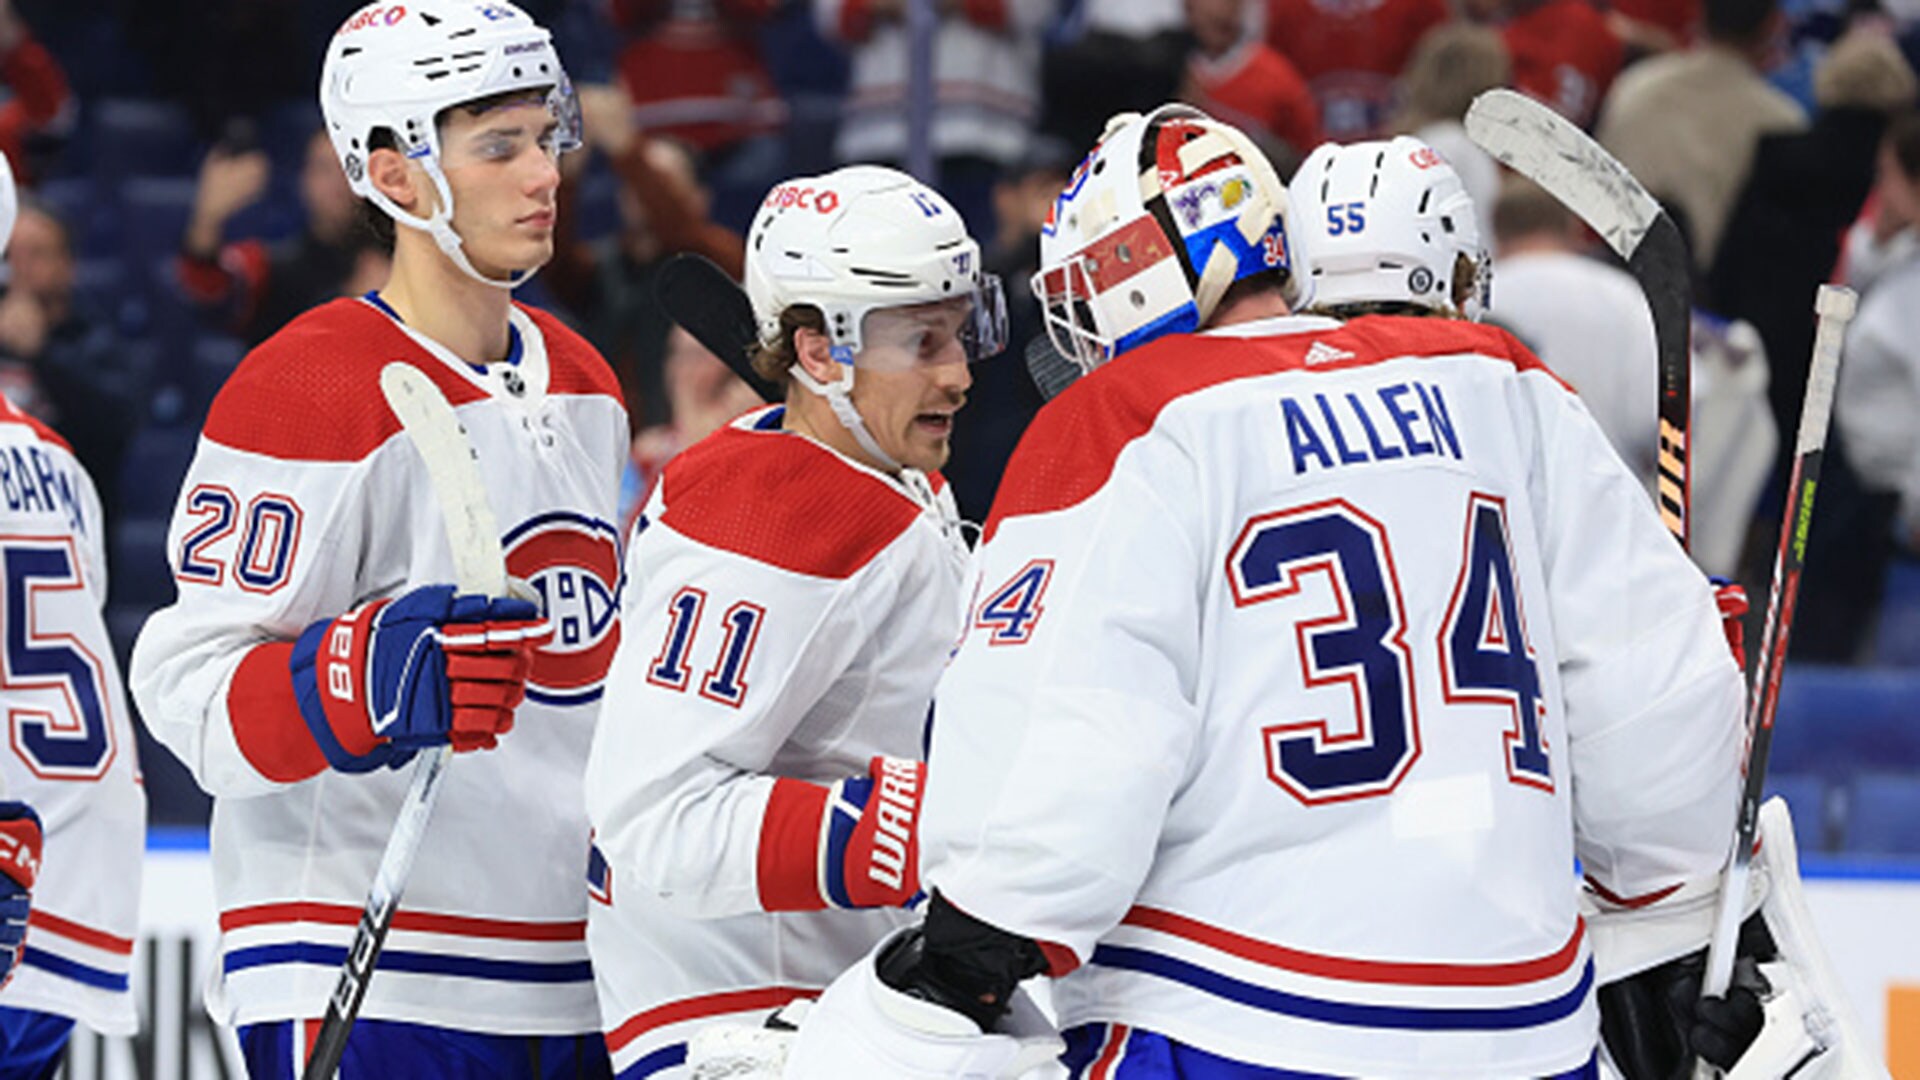 Canadiens shake the retro jersey curse with OT win over Islanders